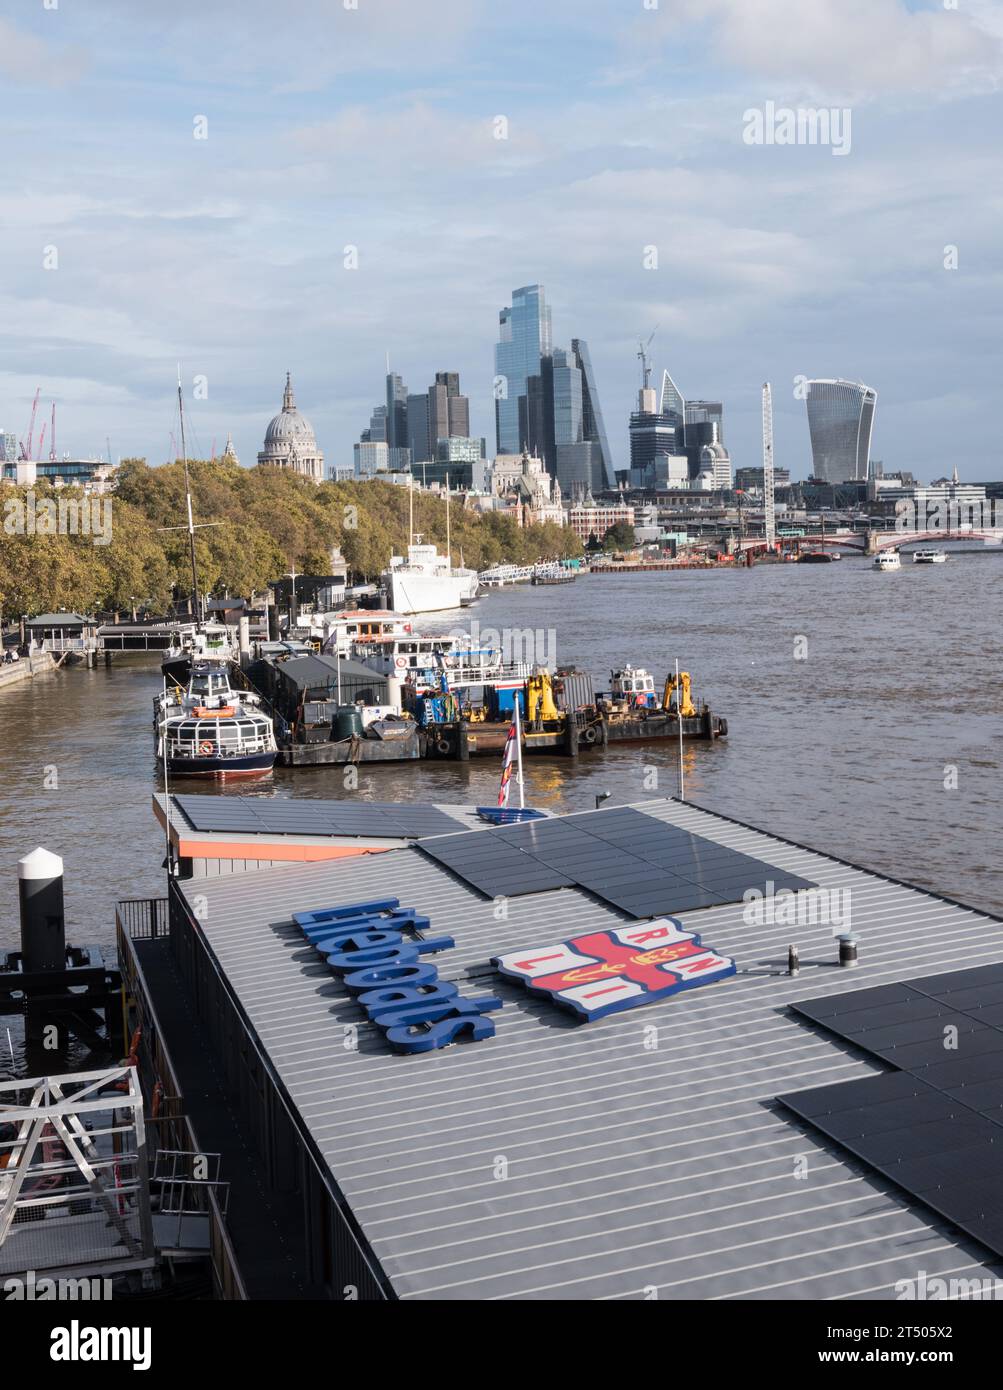 The River Thames and the new RNLI Tower Lifeboat Station, Lifeboat Pier, Victoria Embankment, London, WC2, England, UK Stock Photo